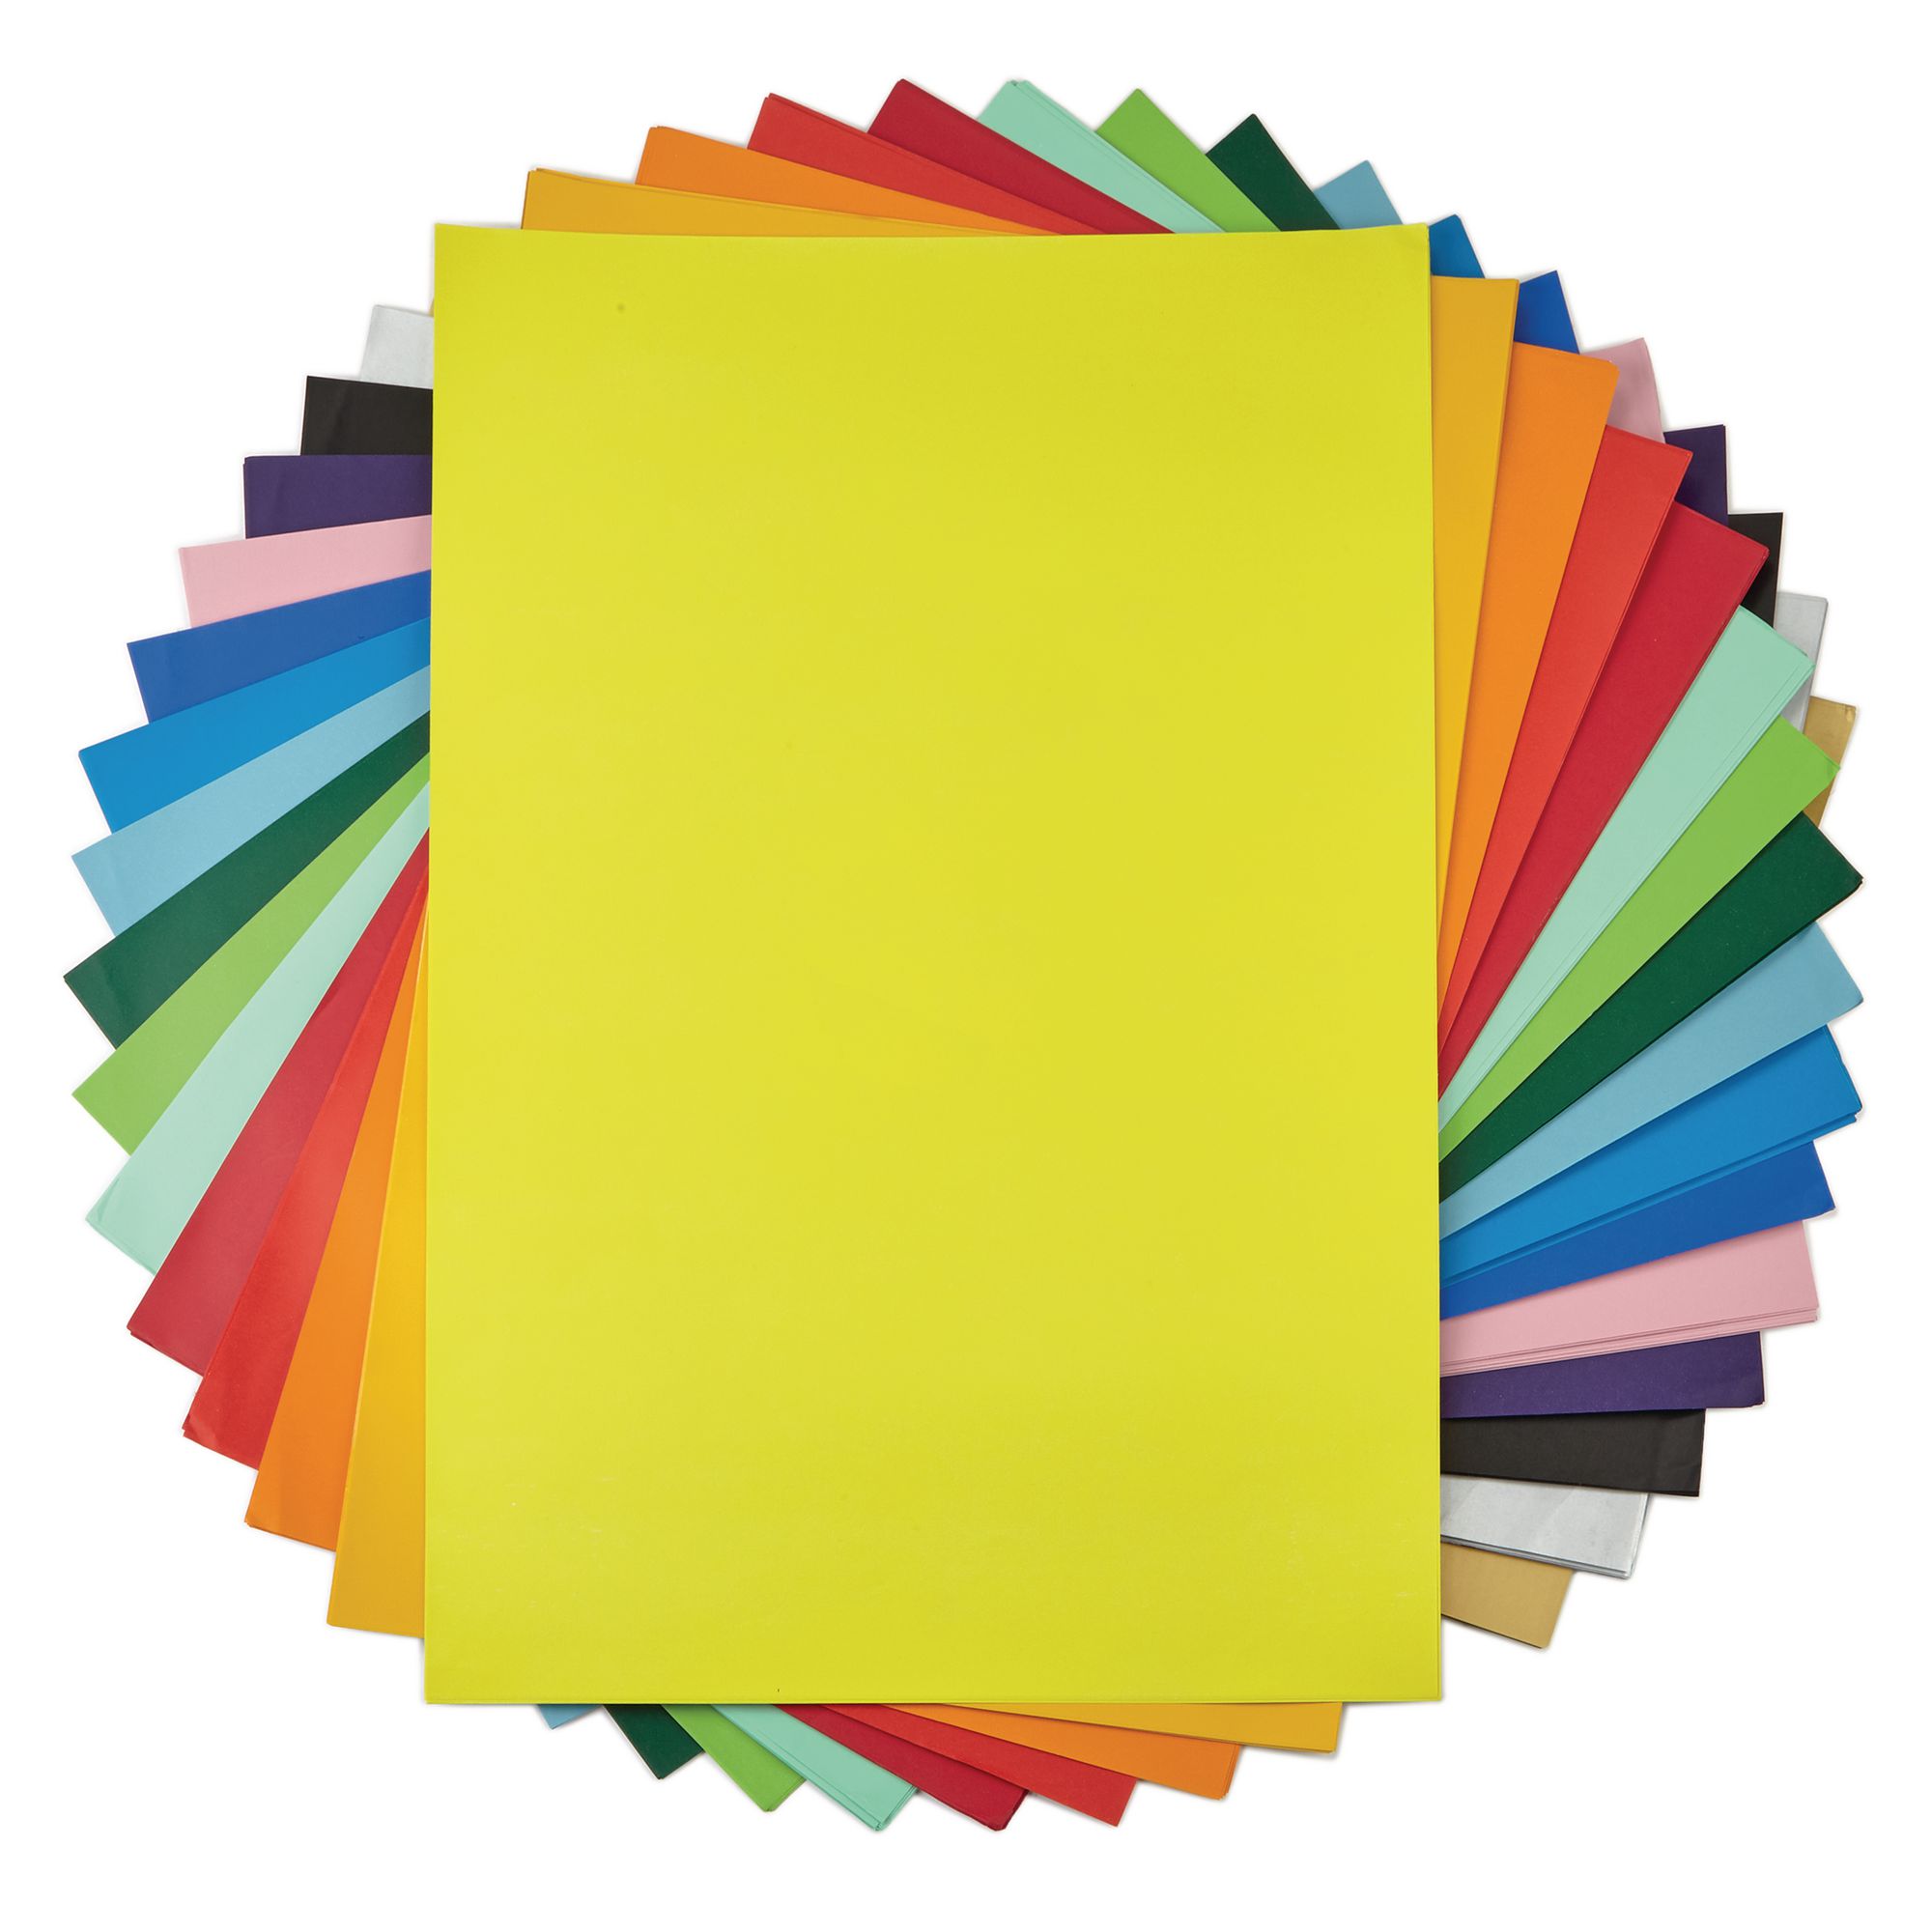 Poster Paper (Red, Blue, Green, Orange, Yellow) 1pc